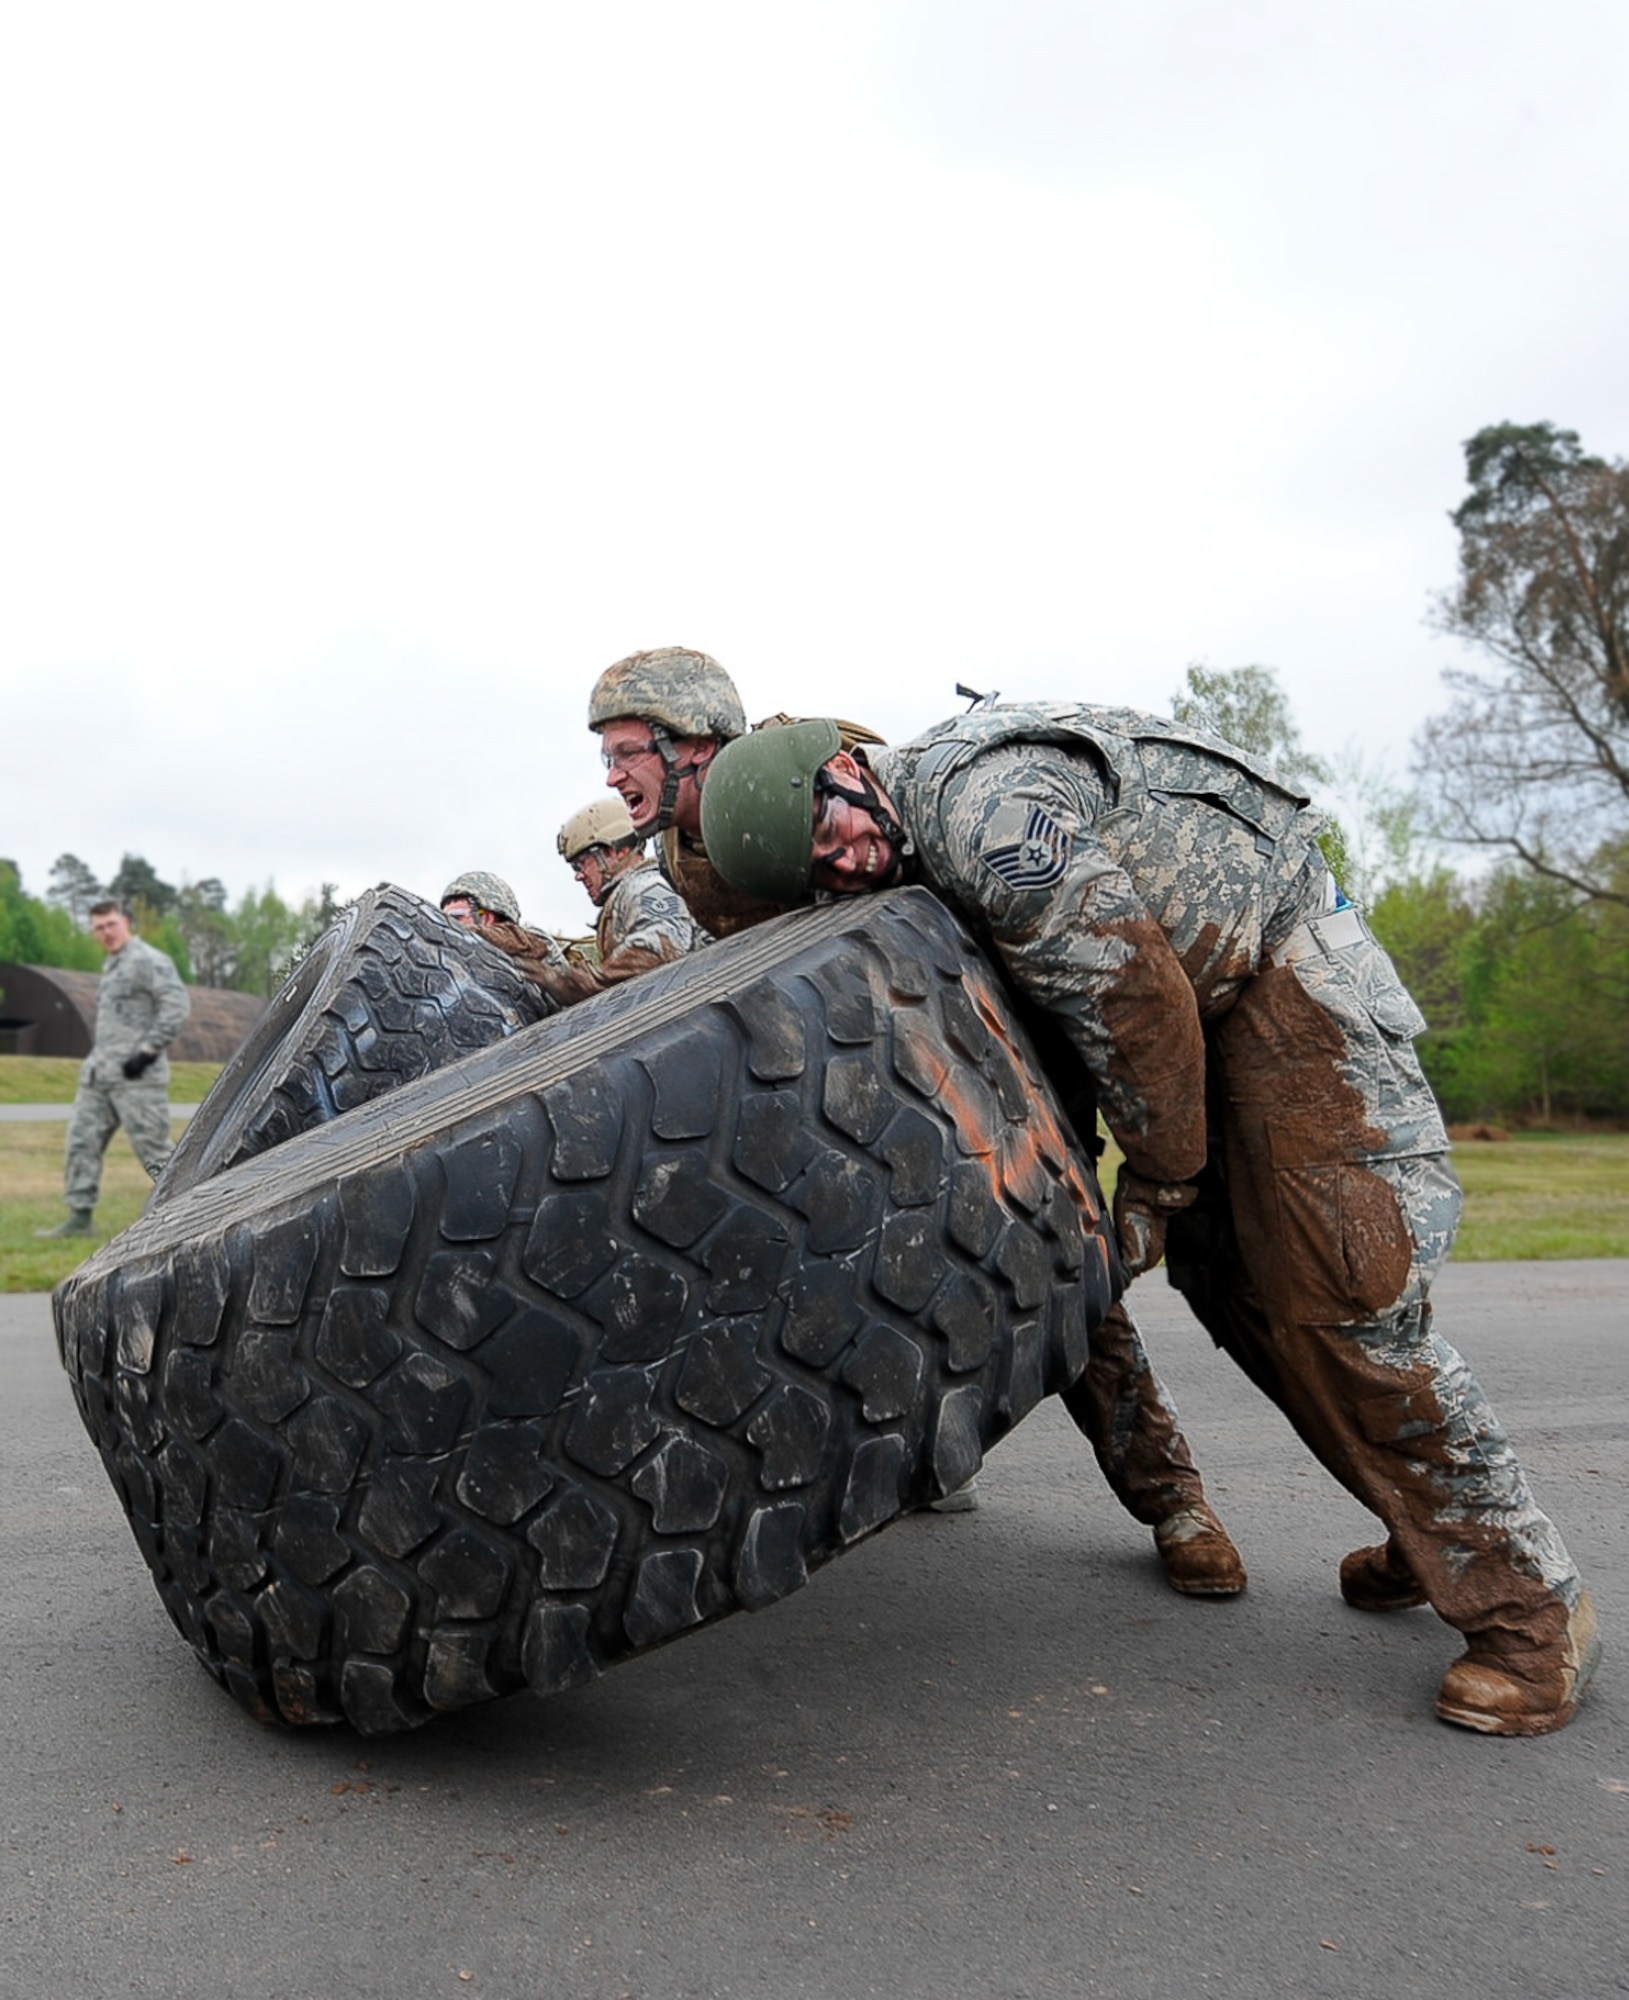 Members from the 435th Contingency Response Group flip tires in an obstacle course during the 435th CRG Olympics on Ramstein Air Base, Germany, May 5, 2017. An obstacle course, Kaiser Sled, and a pallet build were among six events held during the 435th CRG Olympics. (U.S. Air Force photo by Airman 1st Class Savannah L. Waters)